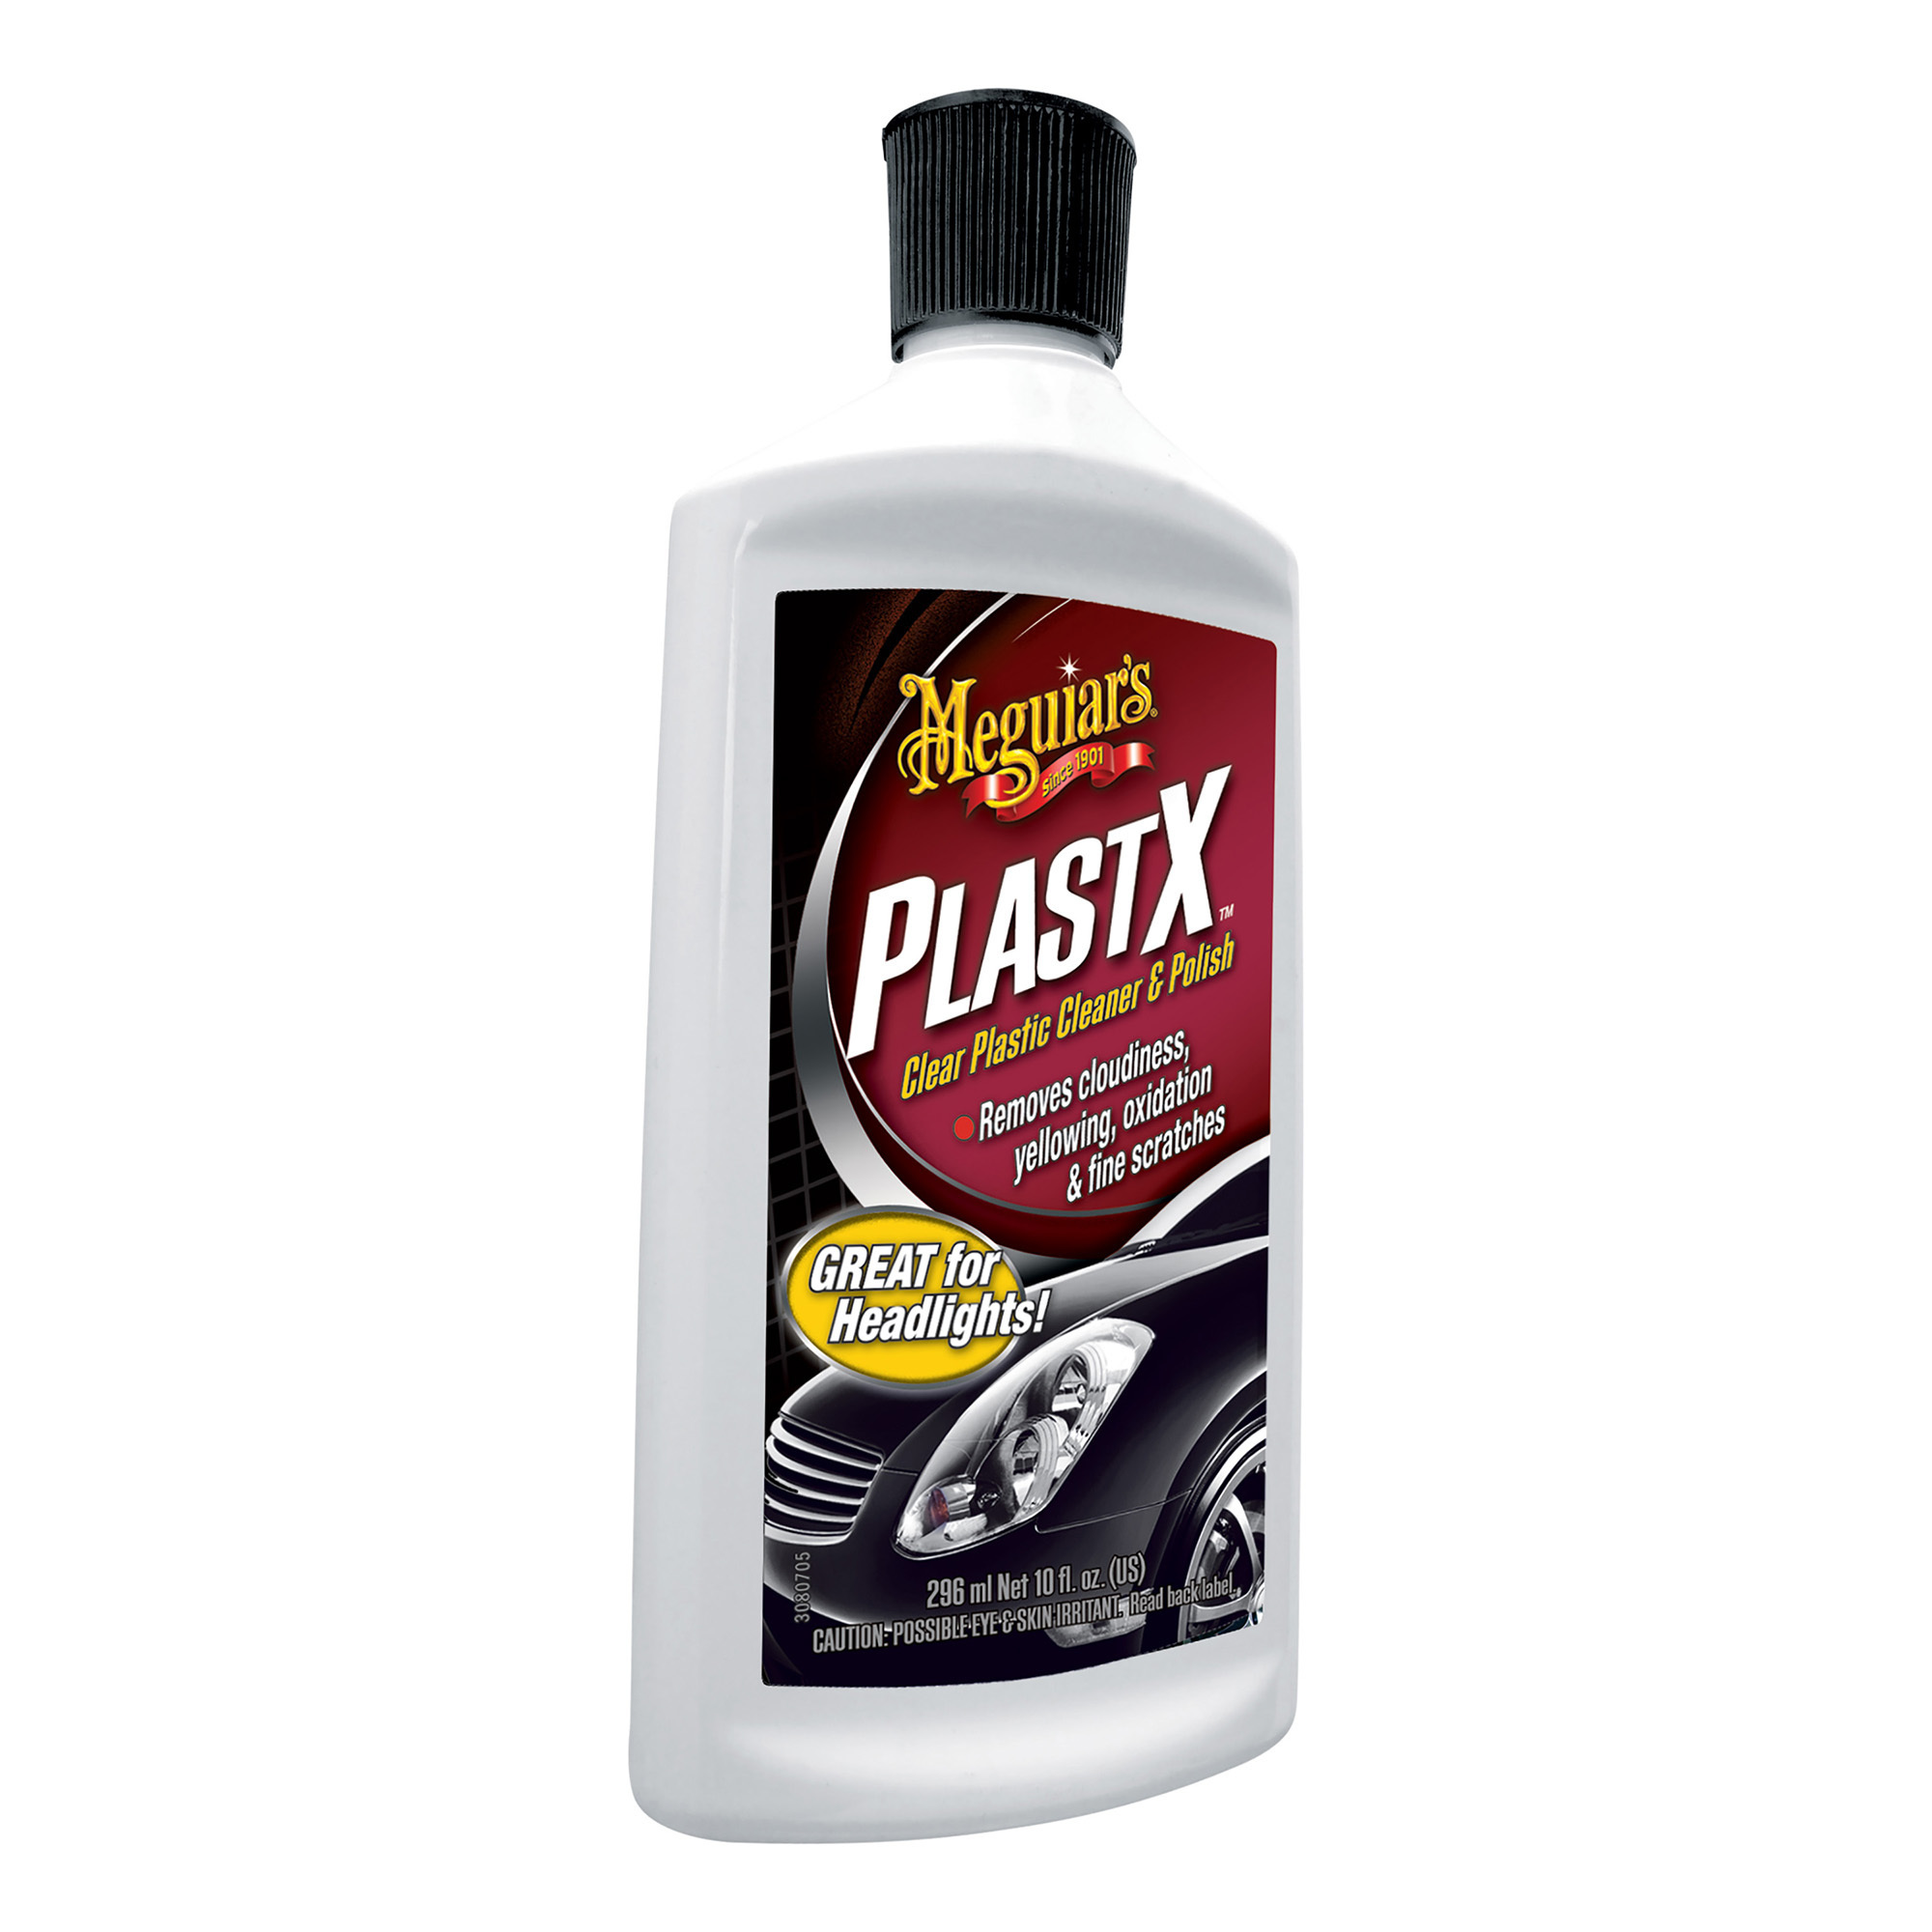 Meguiars Plastx cures foggy headlights (mostly) - neons.org